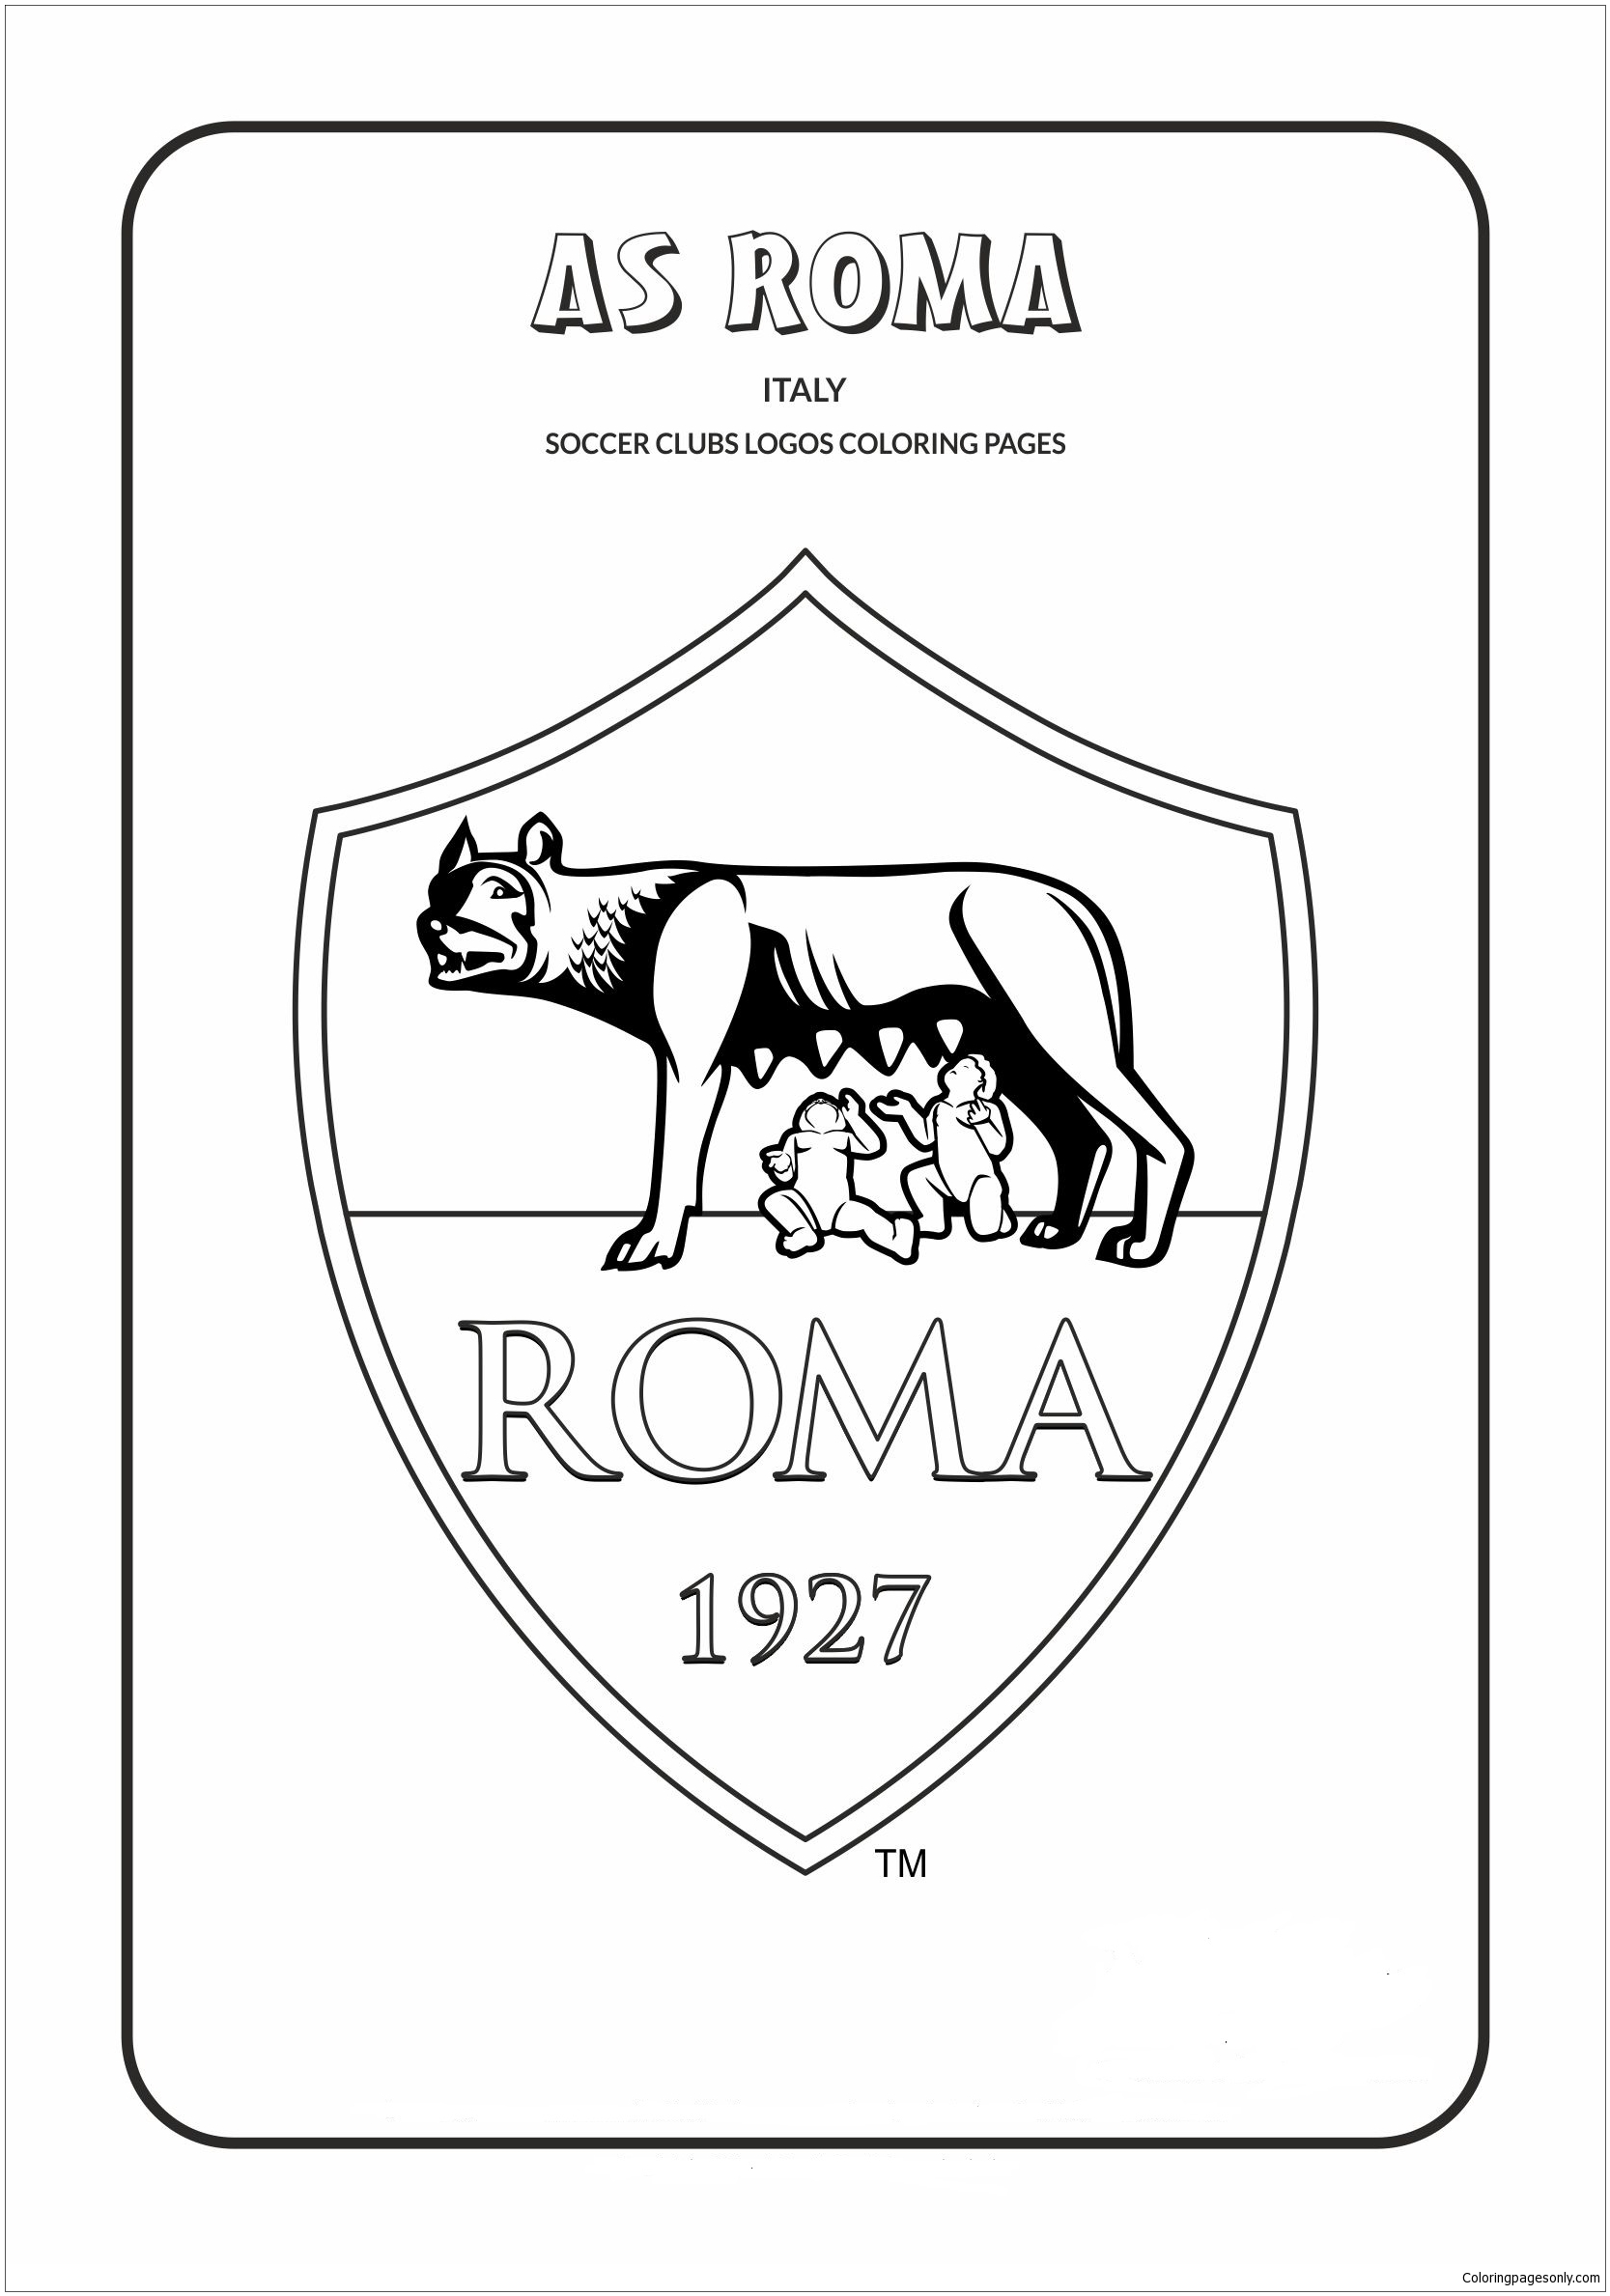 A.S. Roma Coloring Pages